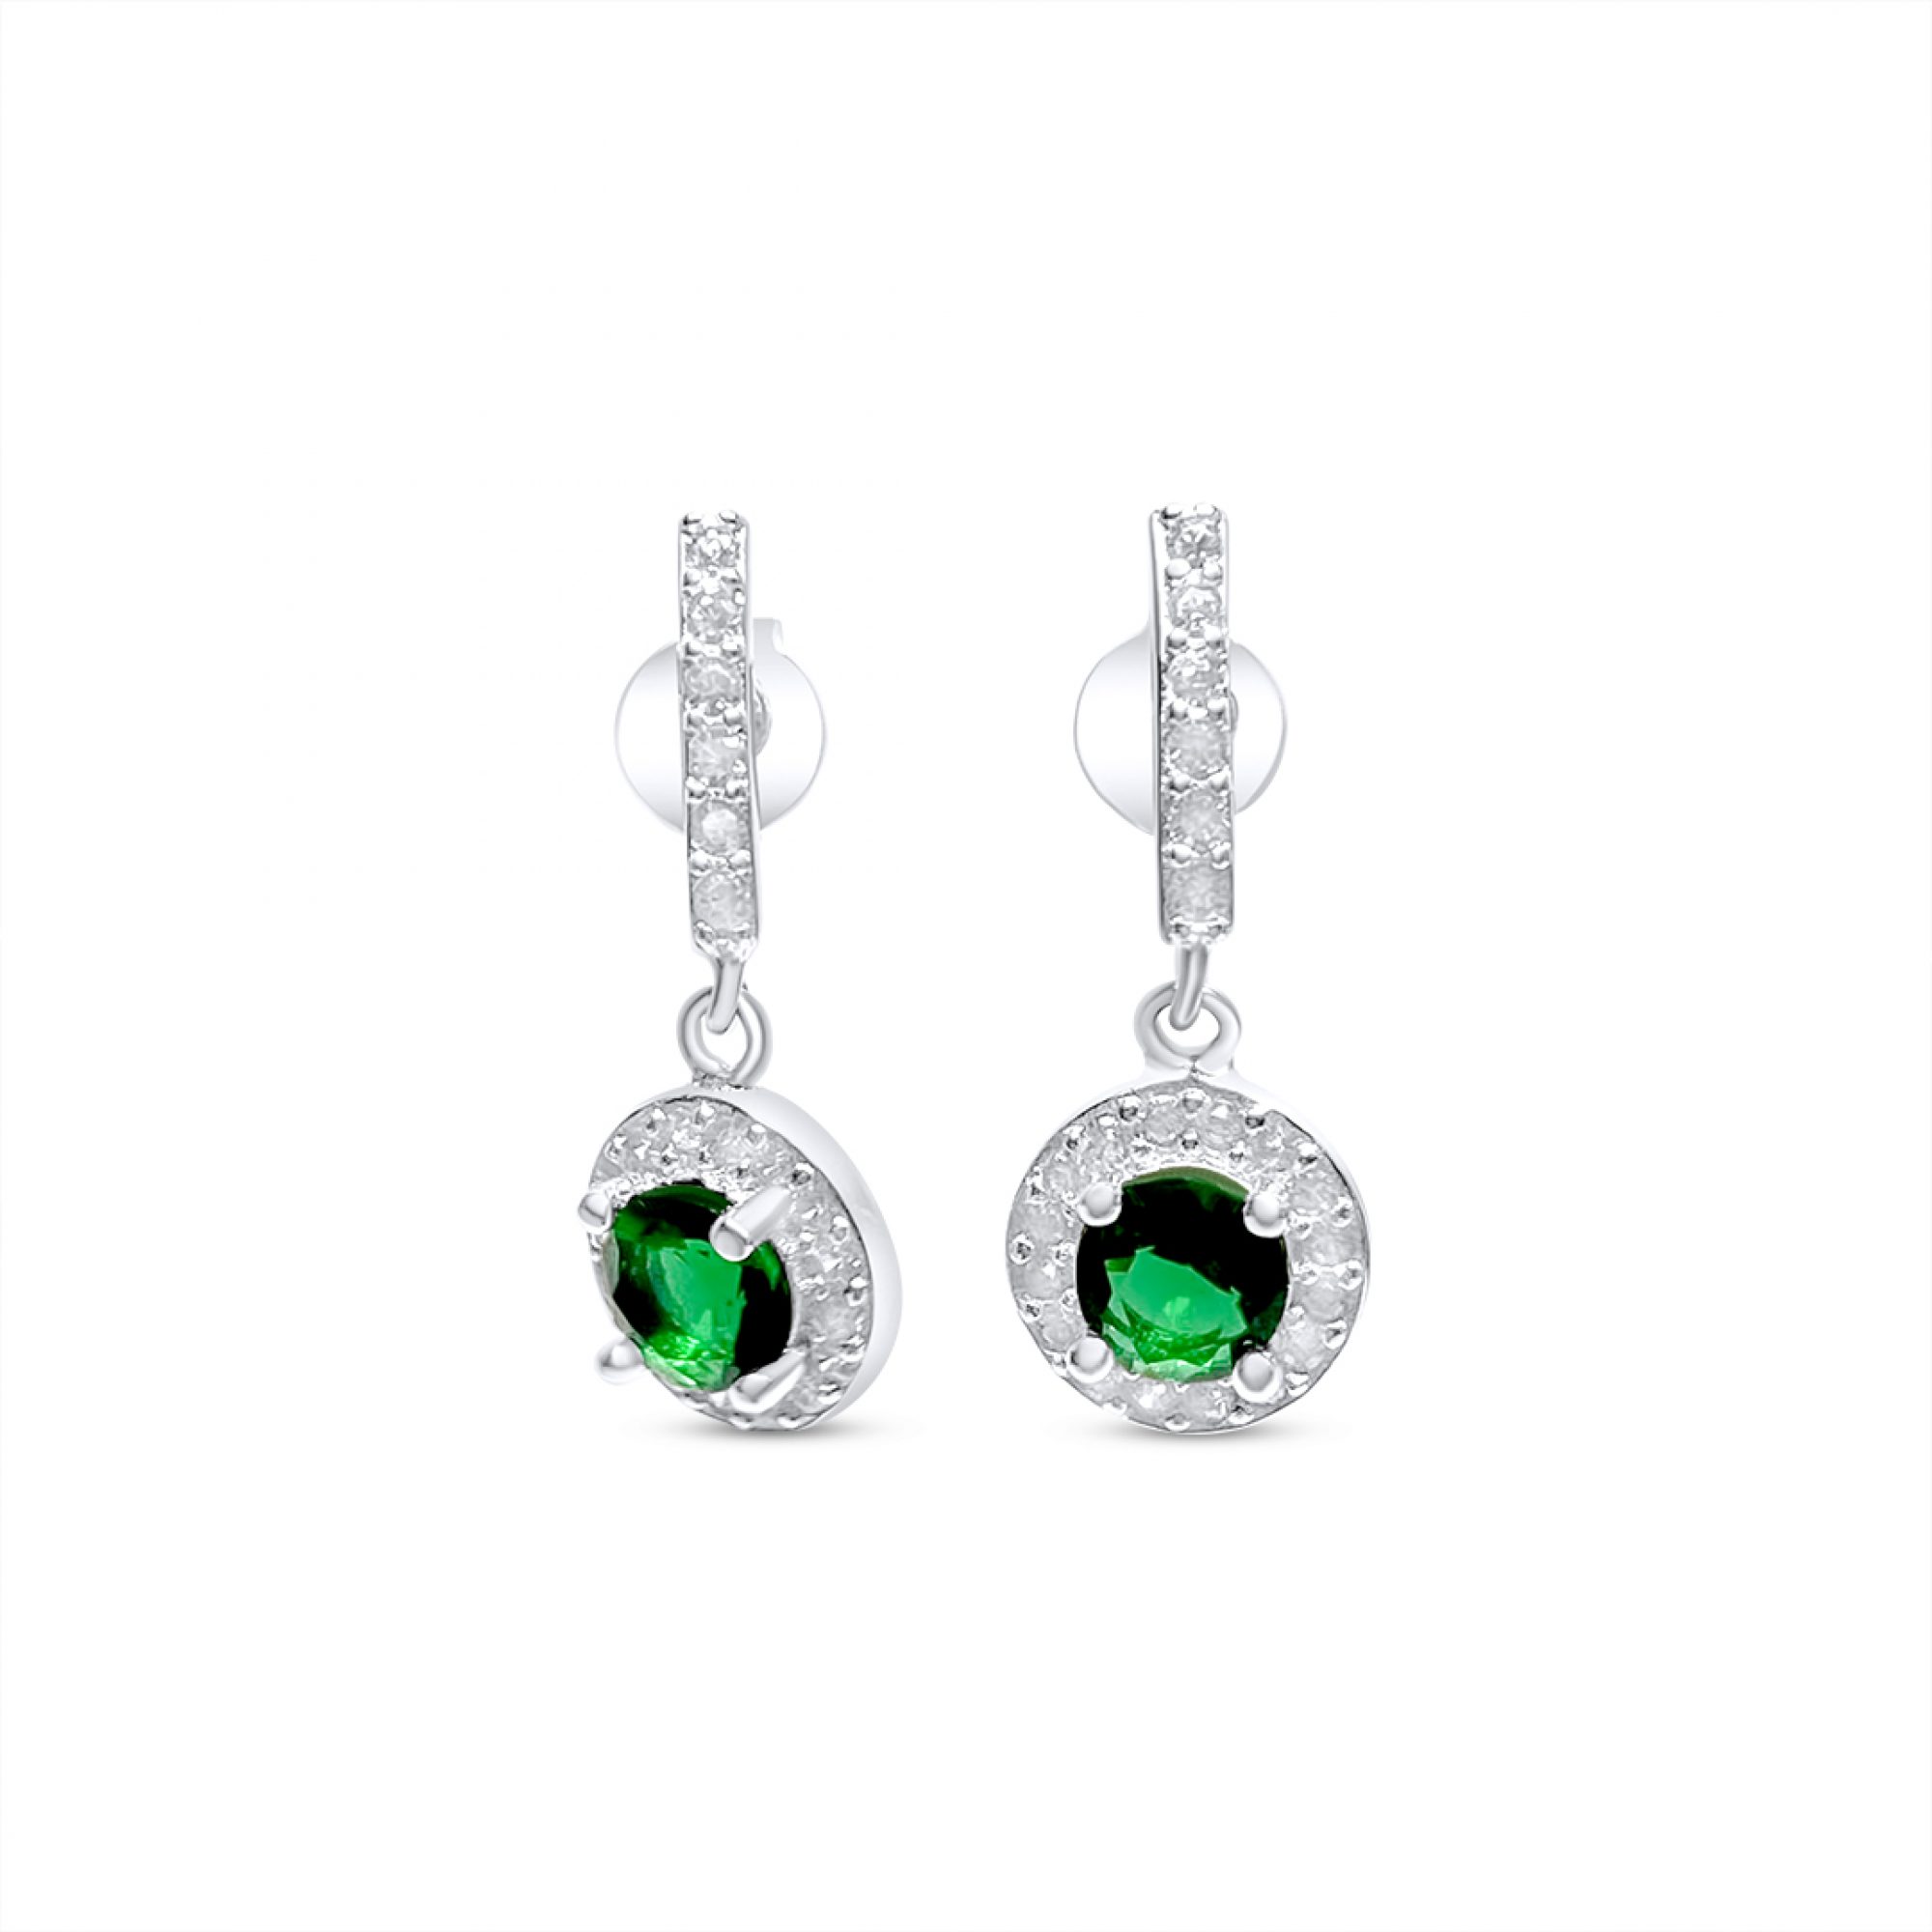 Silver earrings with zircon stones and emerald